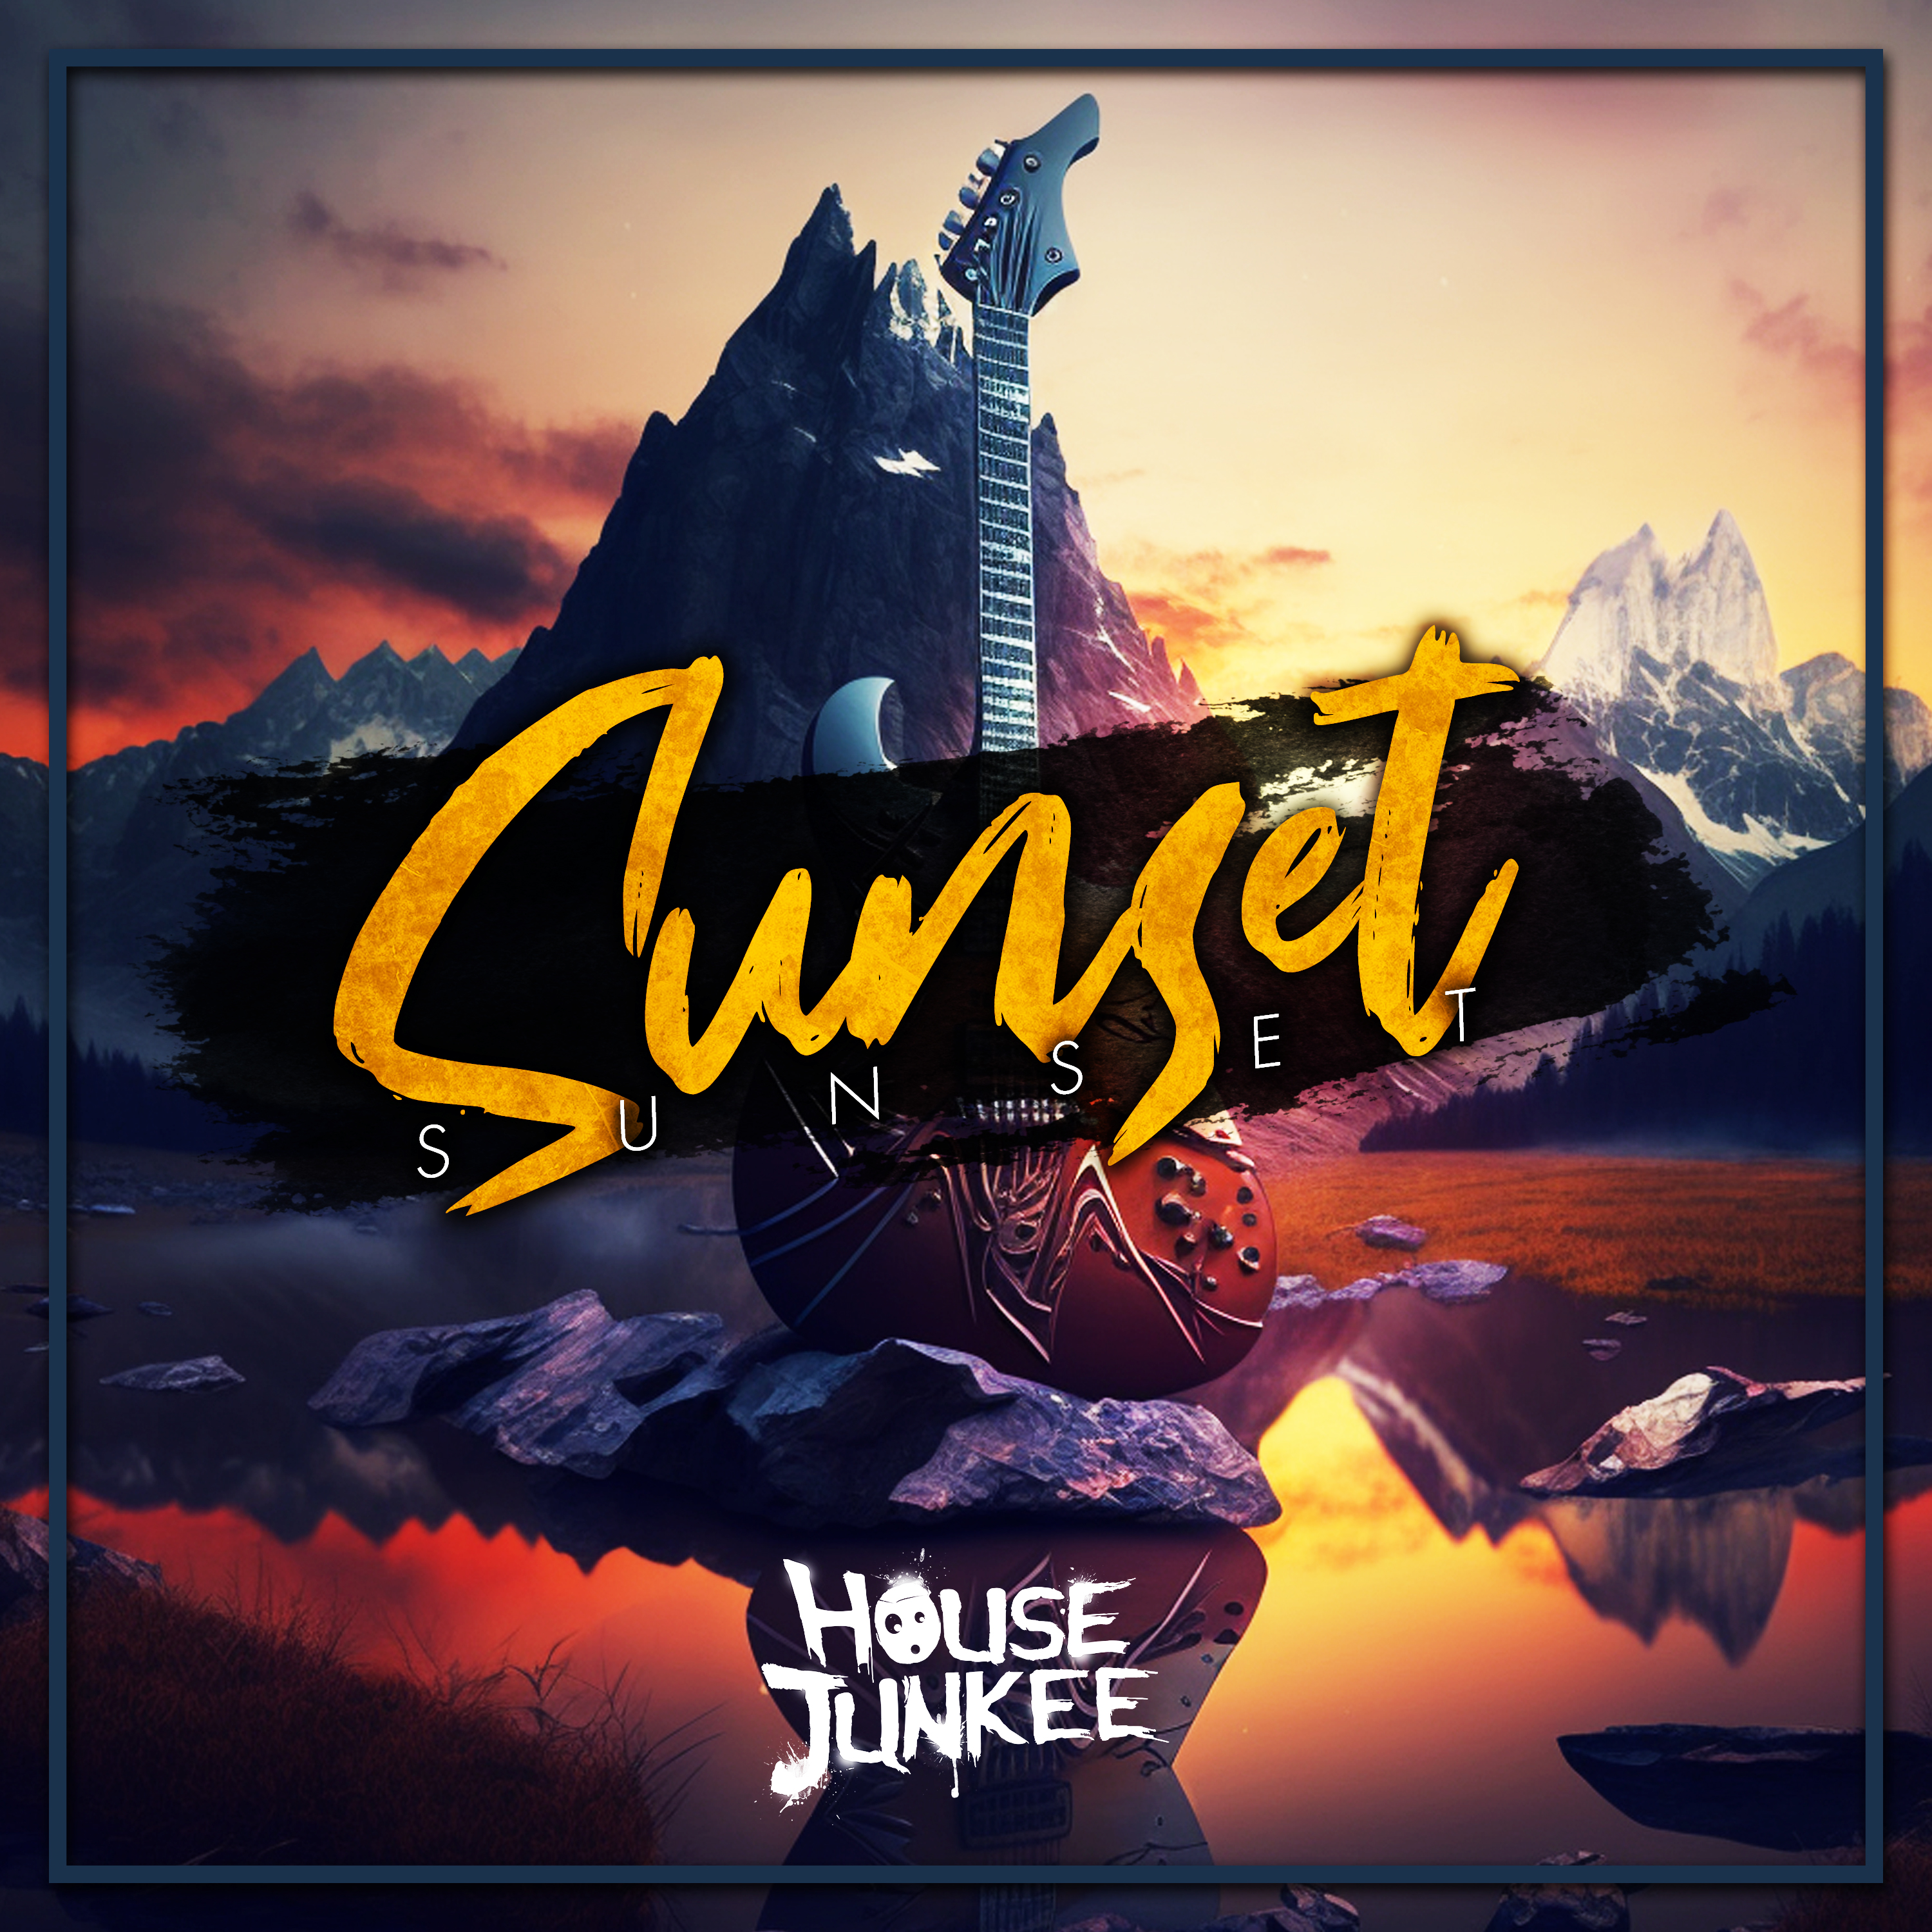 Sunset: Housejunkee's Musical Journey to Tranquility and Companionship